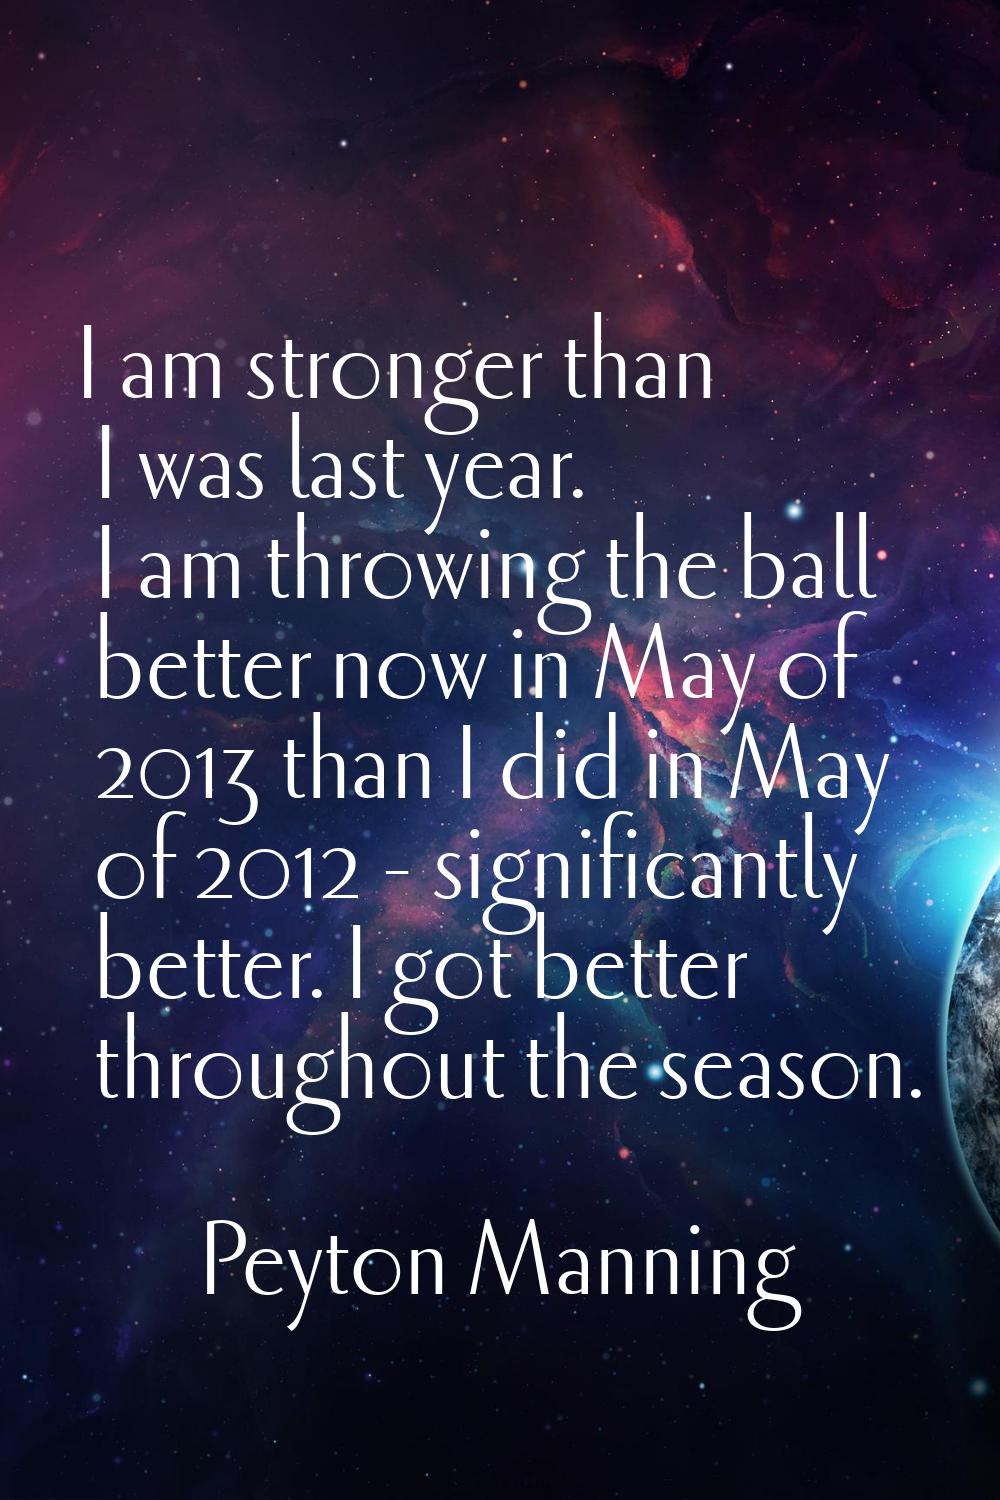 I am stronger than I was last year. I am throwing the ball better now in May of 2013 than I did in 